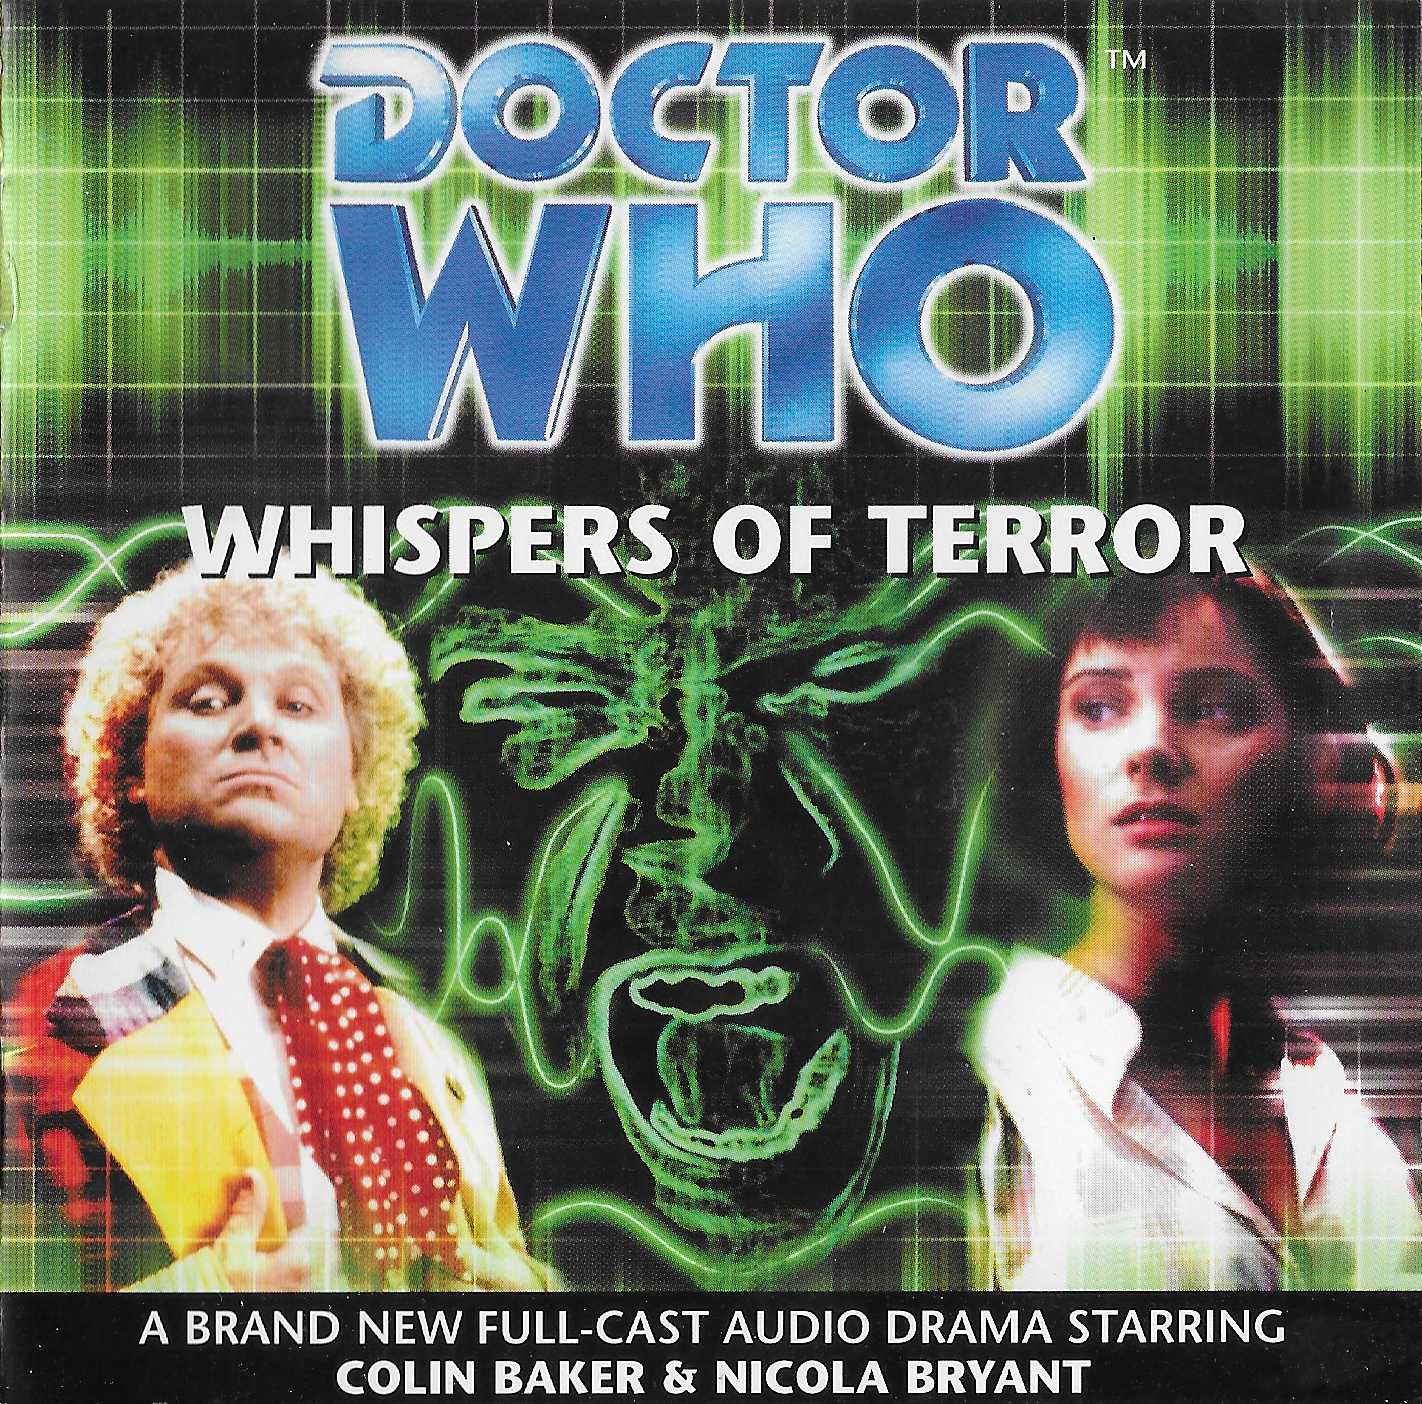 Picture of Doctor Who - Whispers of terror by artist Justin Richards from the BBC cds - Records and Tapes library